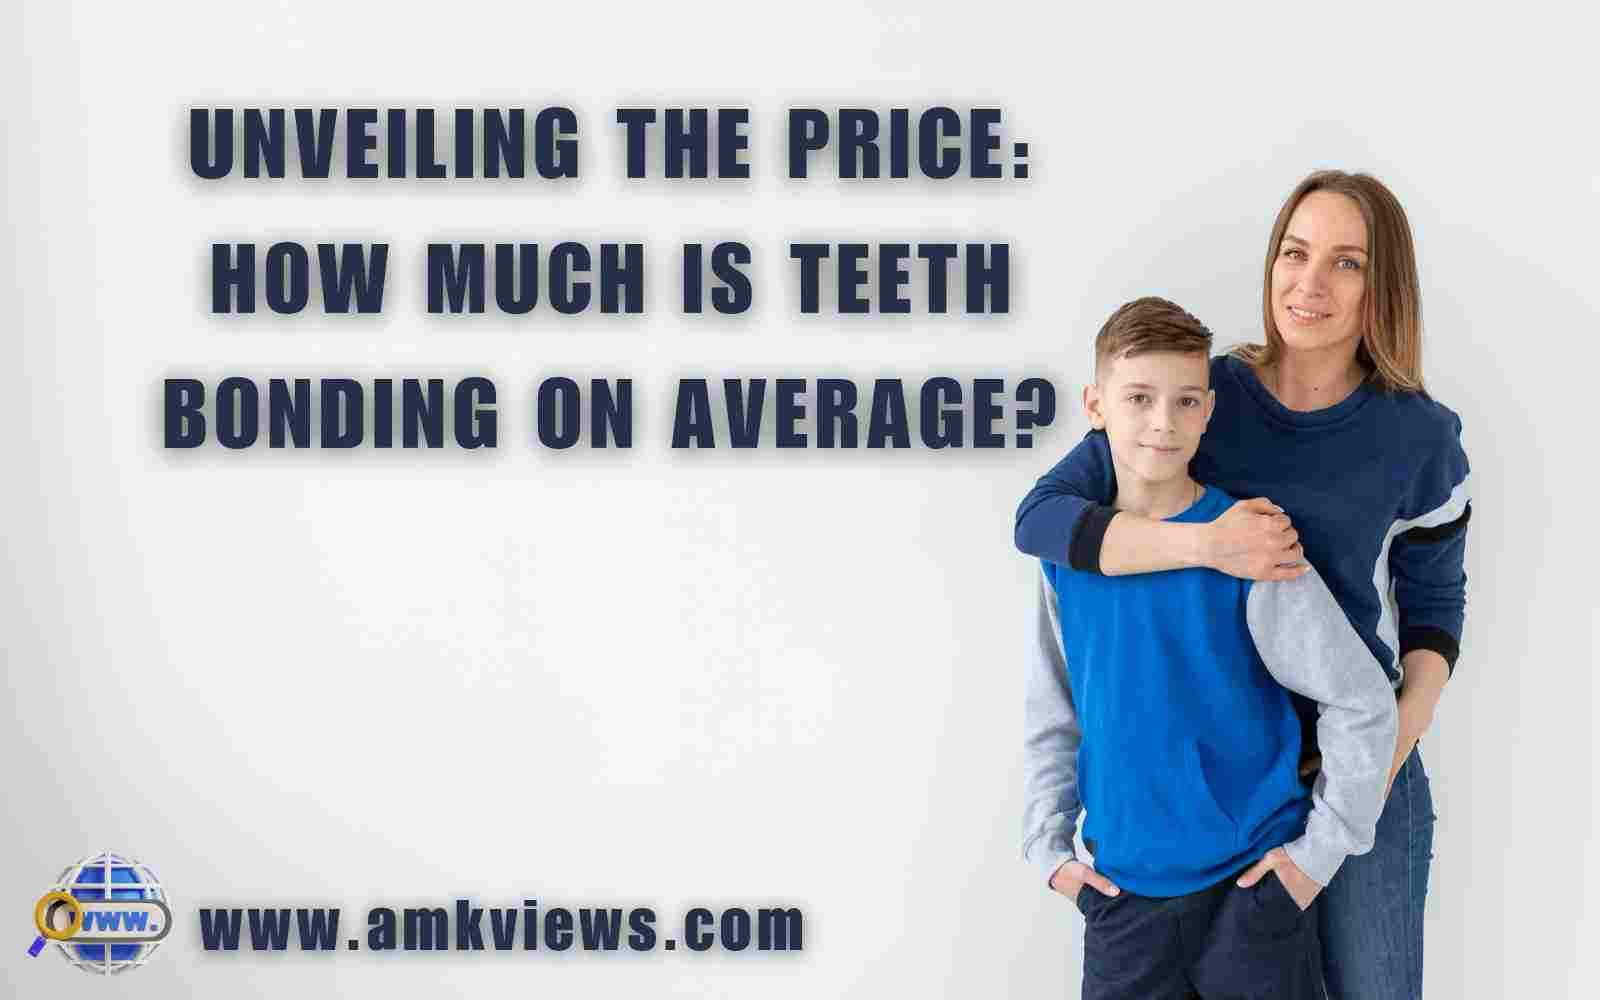 Unveiling the Price: How Much is Teeth Bonding on Average?